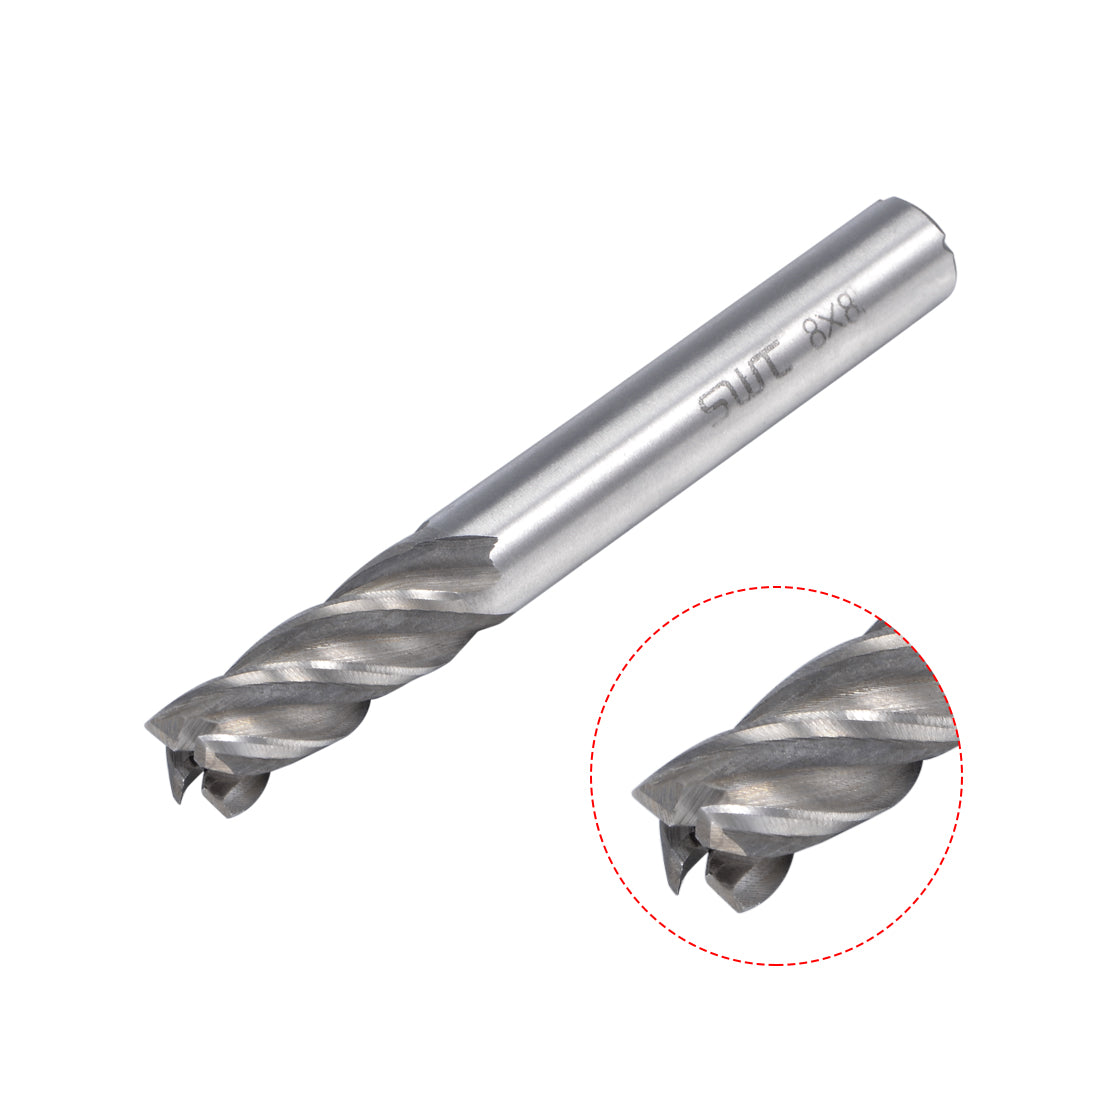 uxcell Uxcell 8mm Shank 8mm x 19mm Straight Flat Nose End Mill Cutter CNC Router Bits 4 Flute